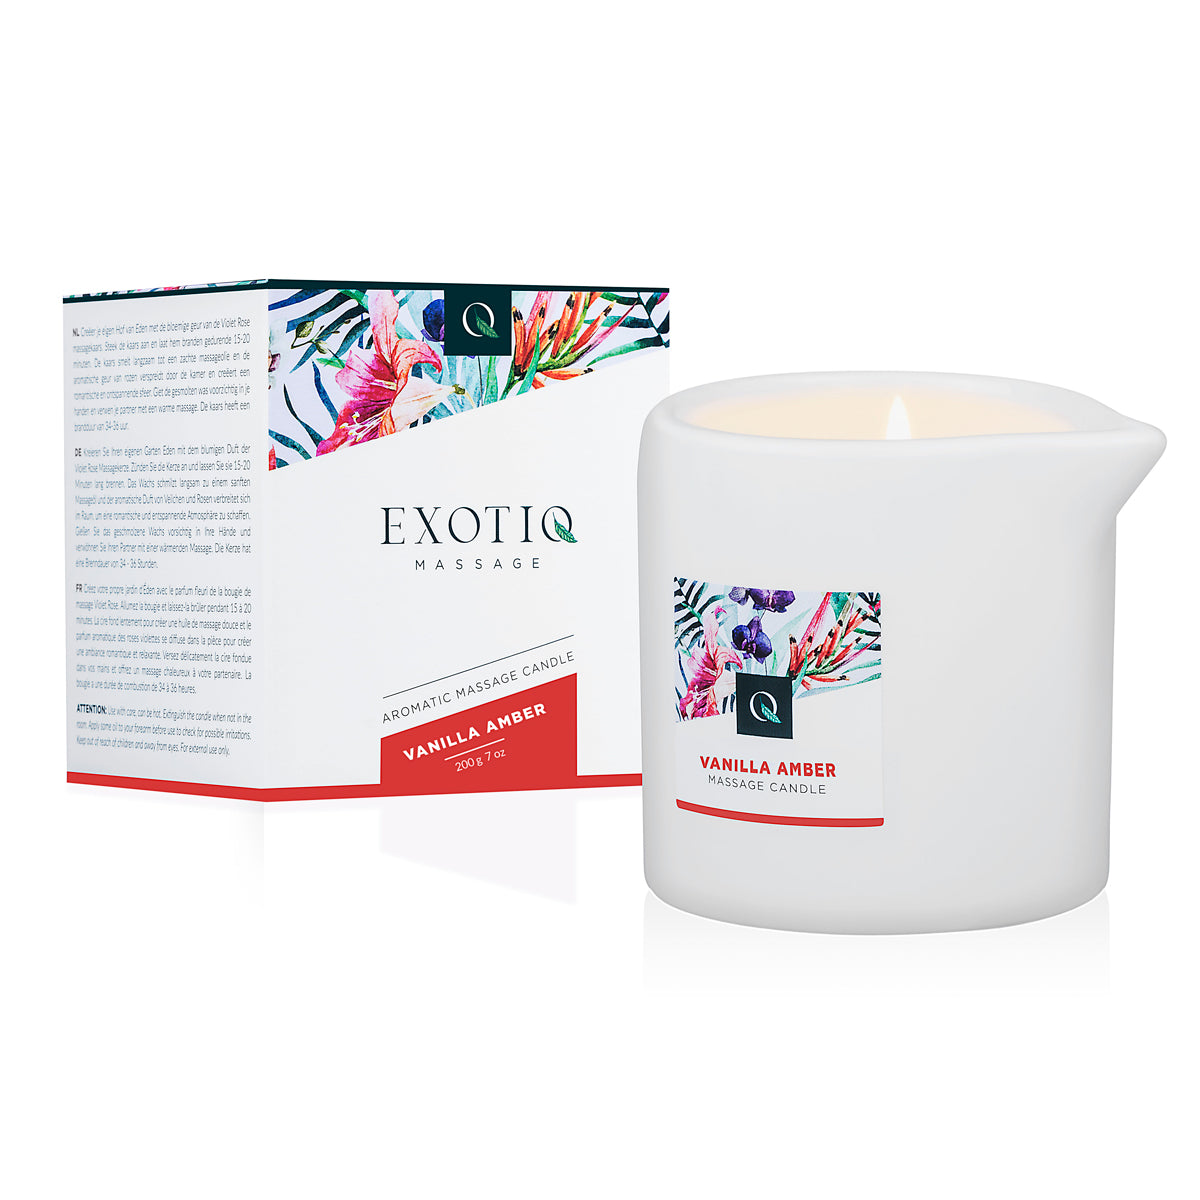 Exotiq Massage Candle Vanilla Amber 200g - Just for you desires